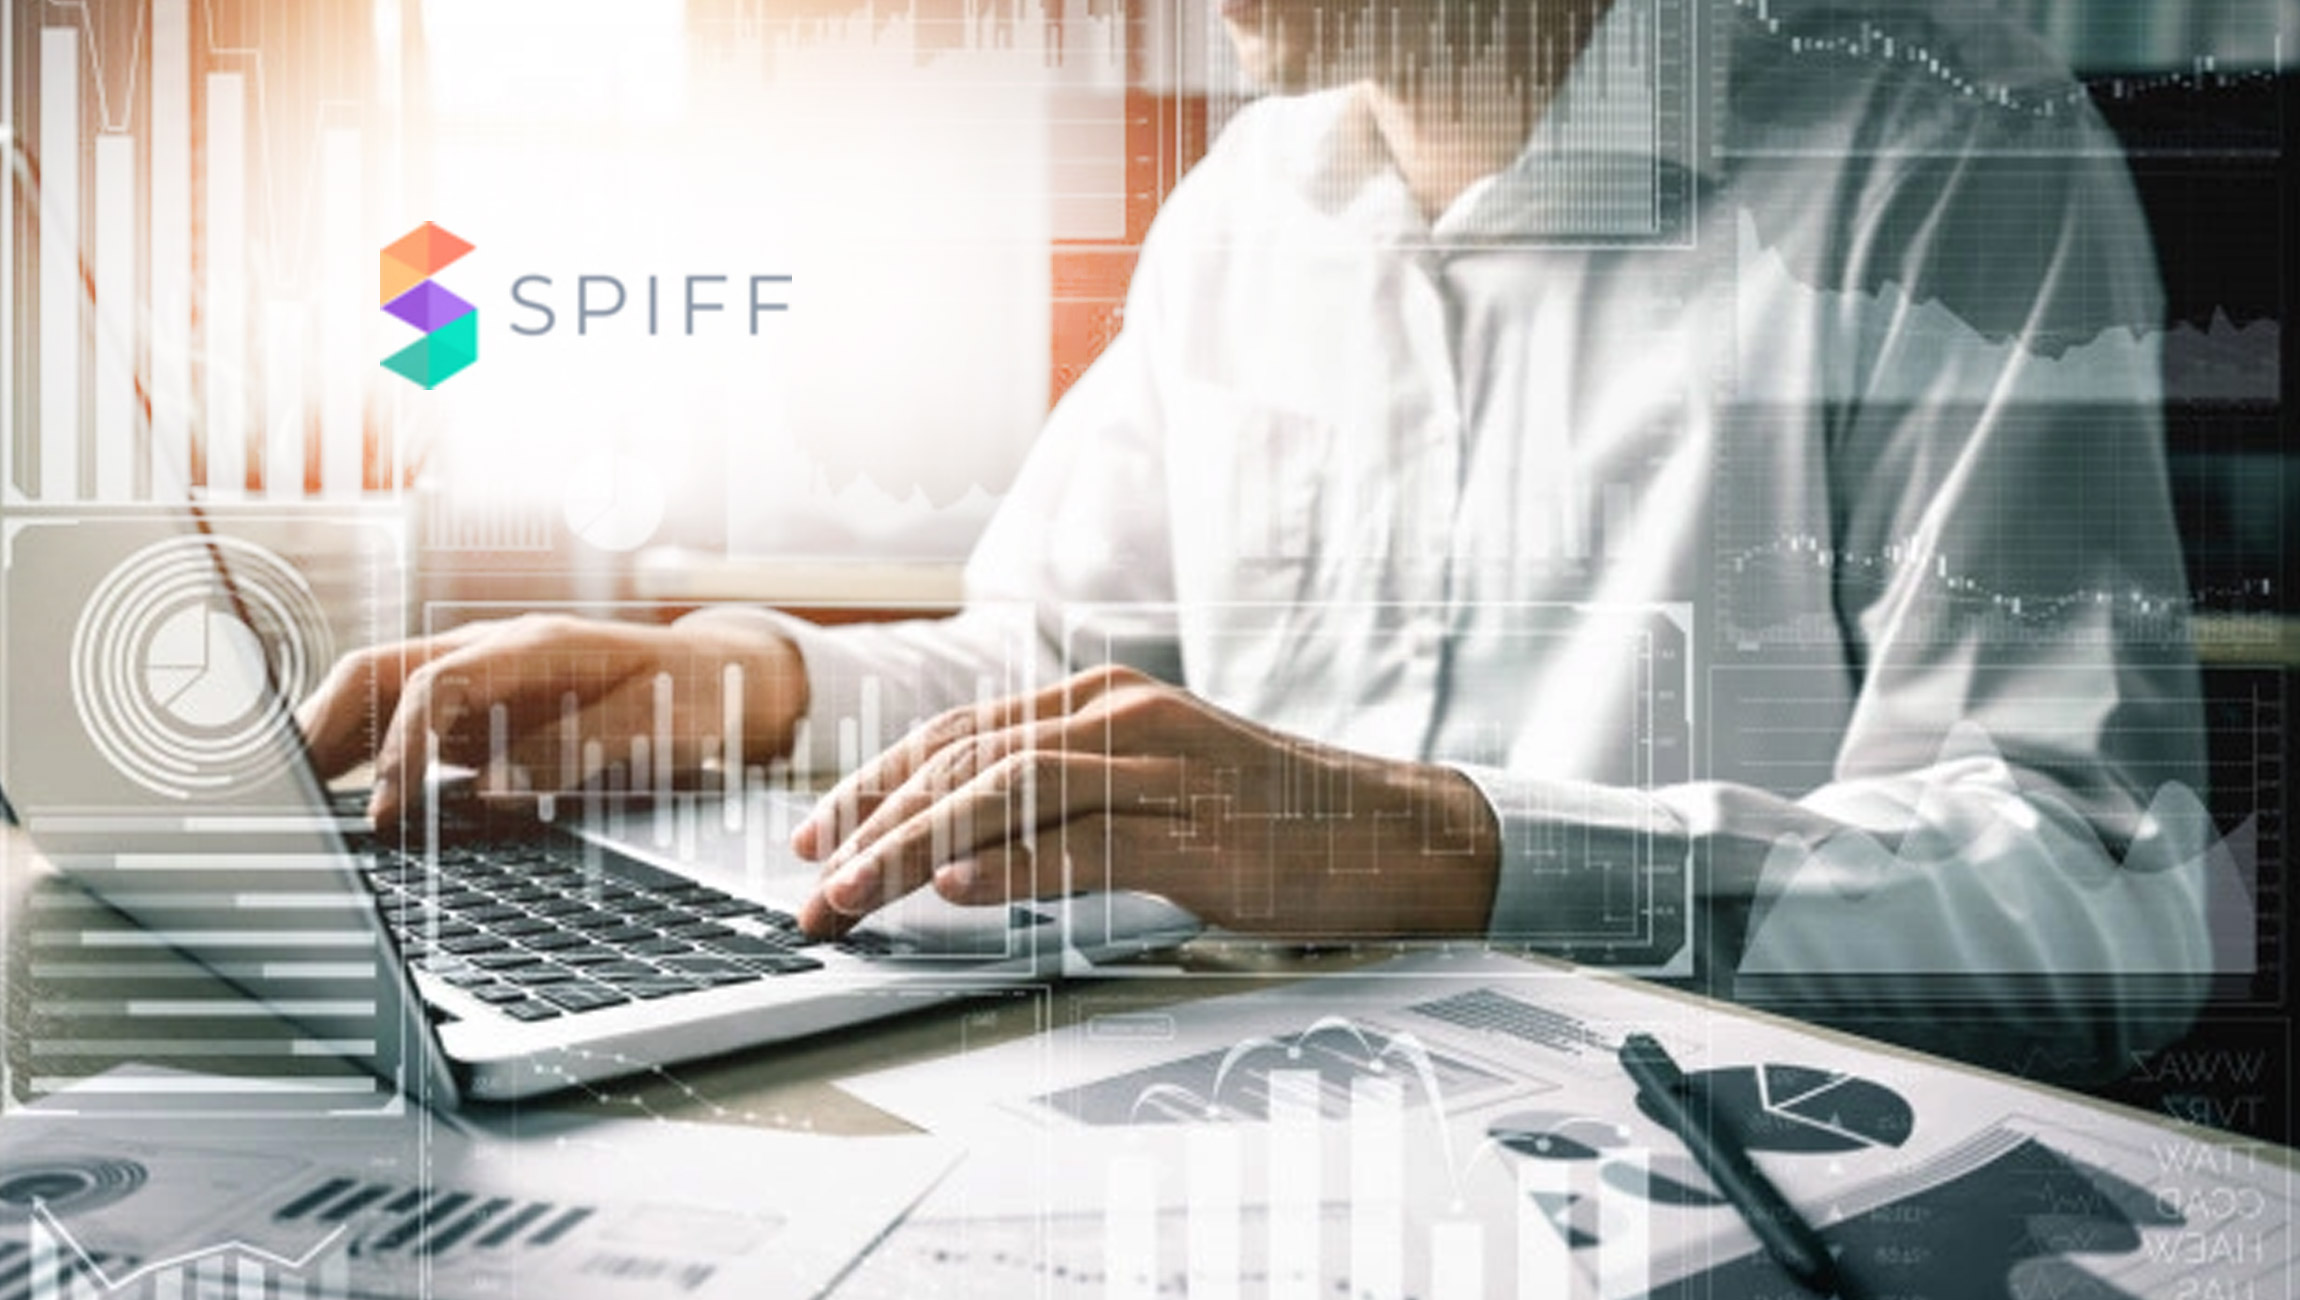 New Spiff Experience Delivers the Familiarity of Spreadsheets